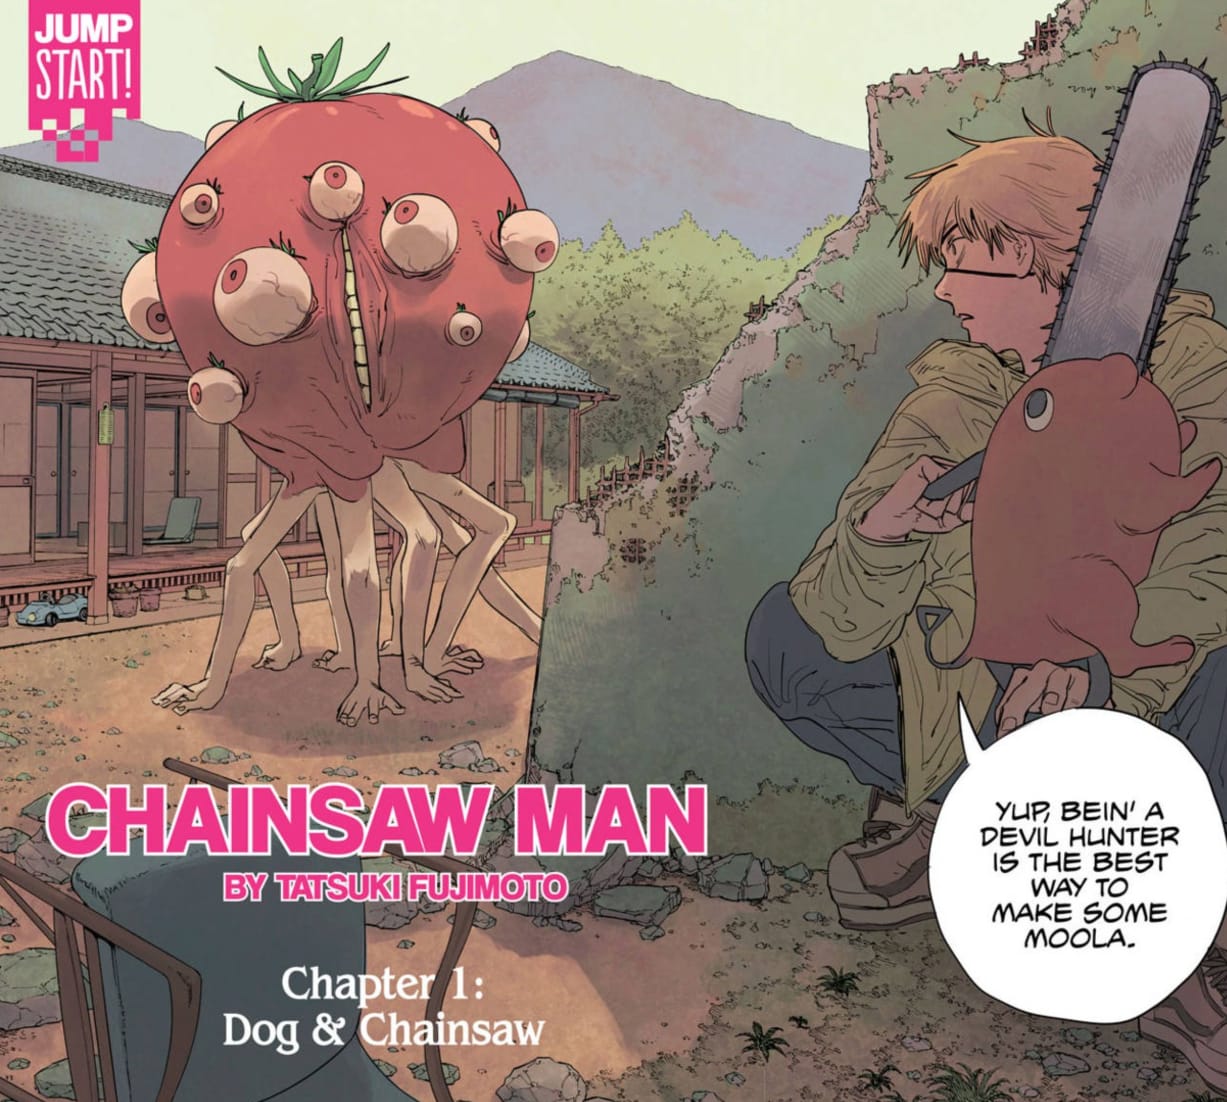 Chainsaw Man Gets Official Preview And Synopsis For Episode 1